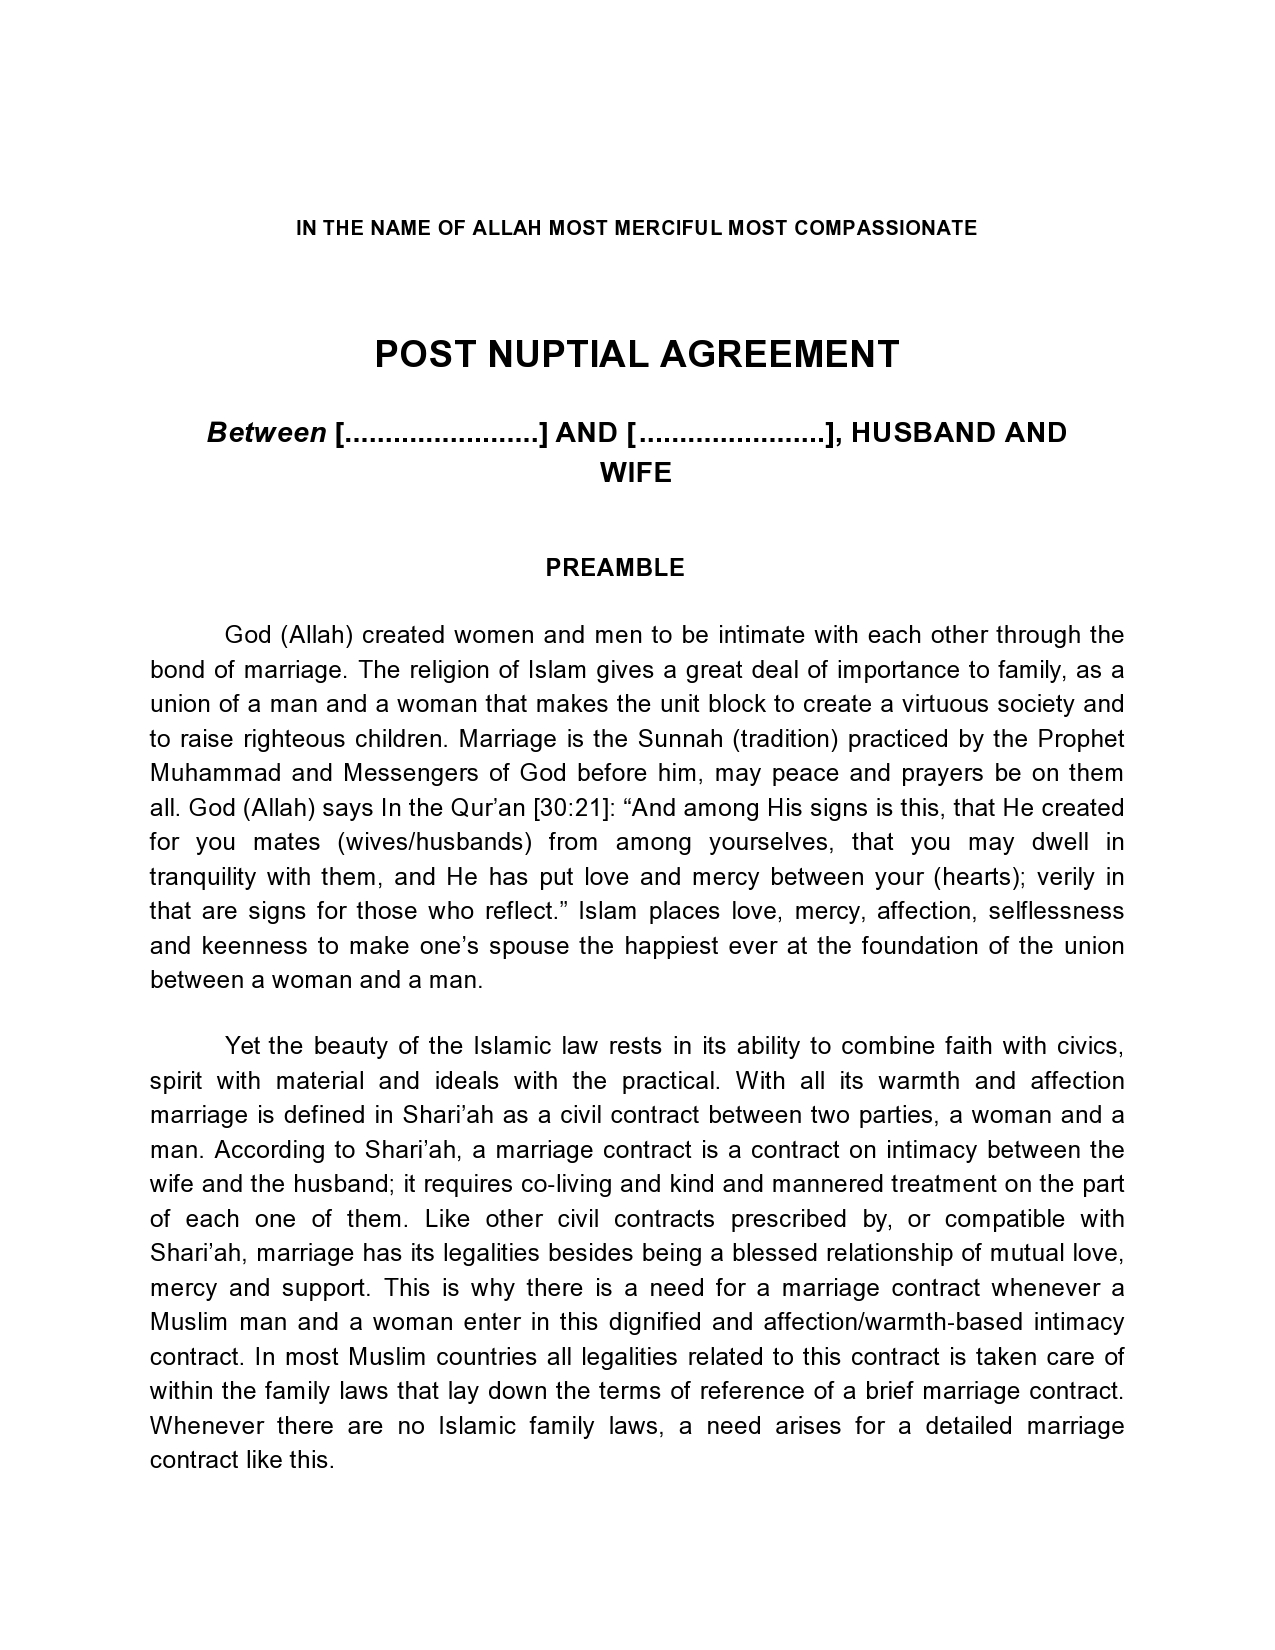 Free postnuptial agreement template 24